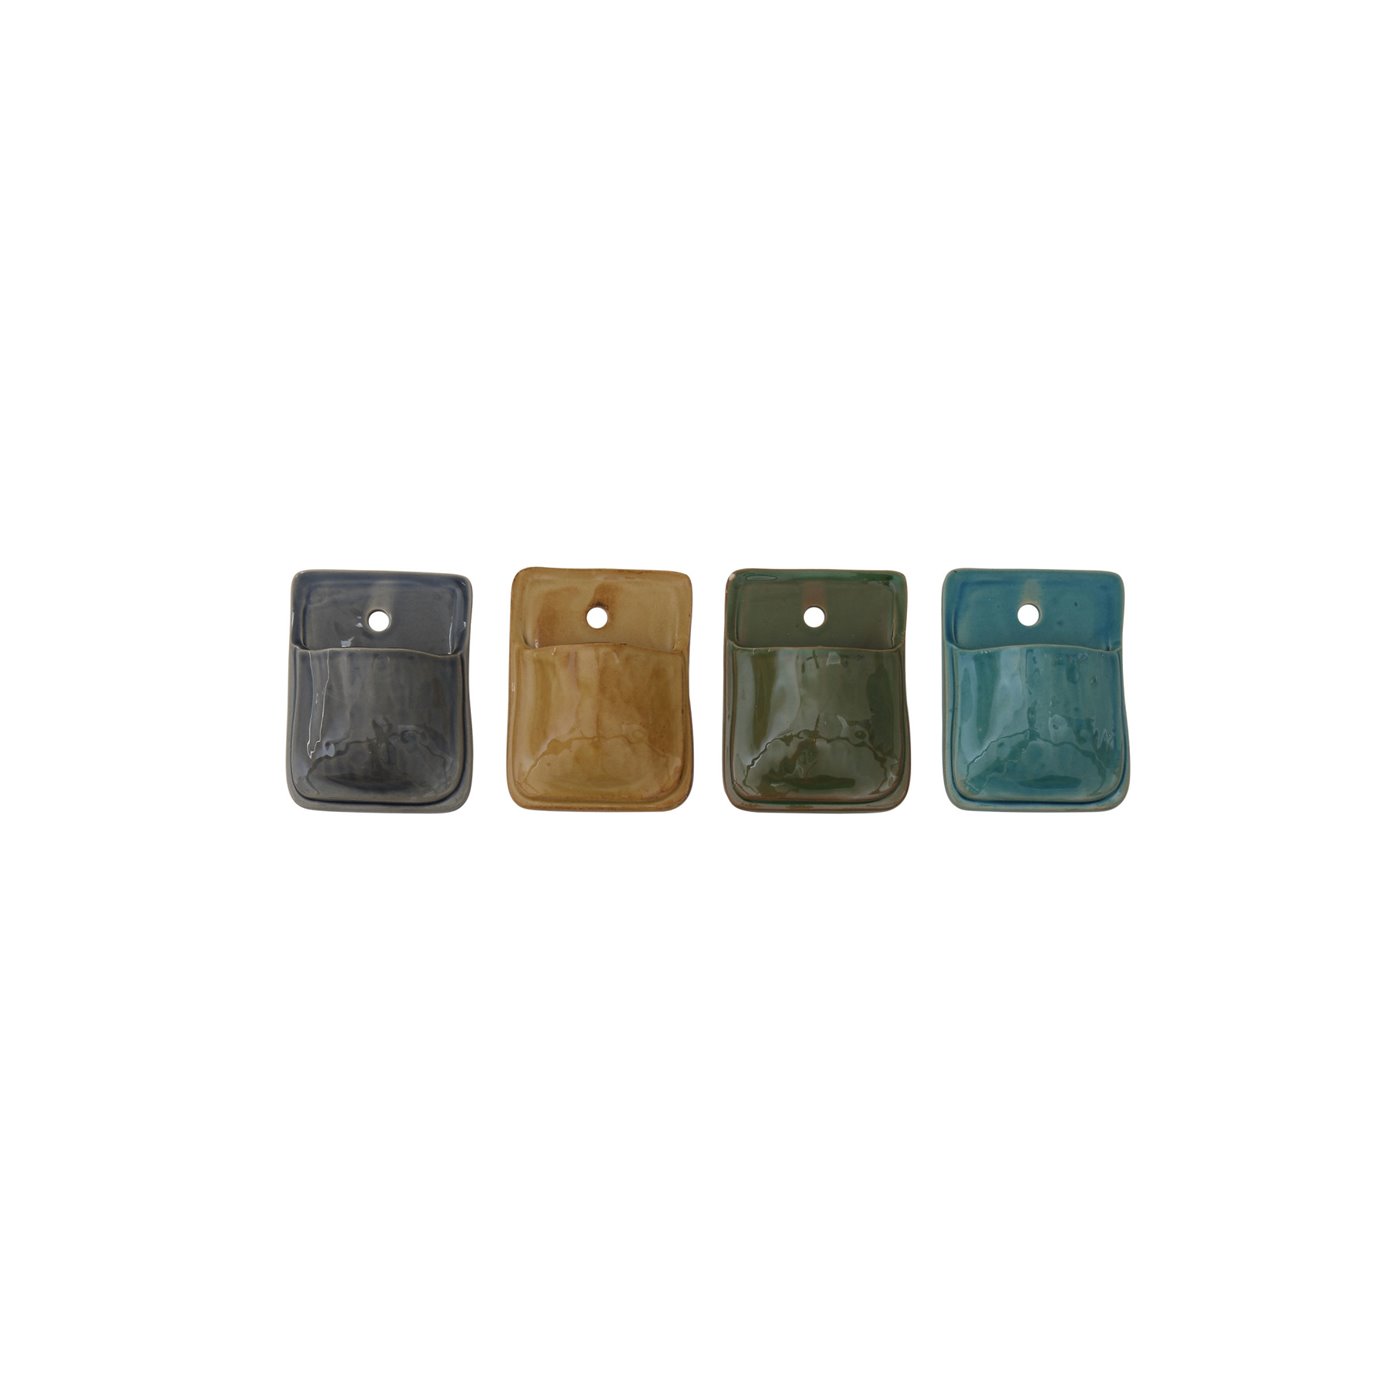 Small Pocket Terracotta Wall Planter (Set of 4 Colors)